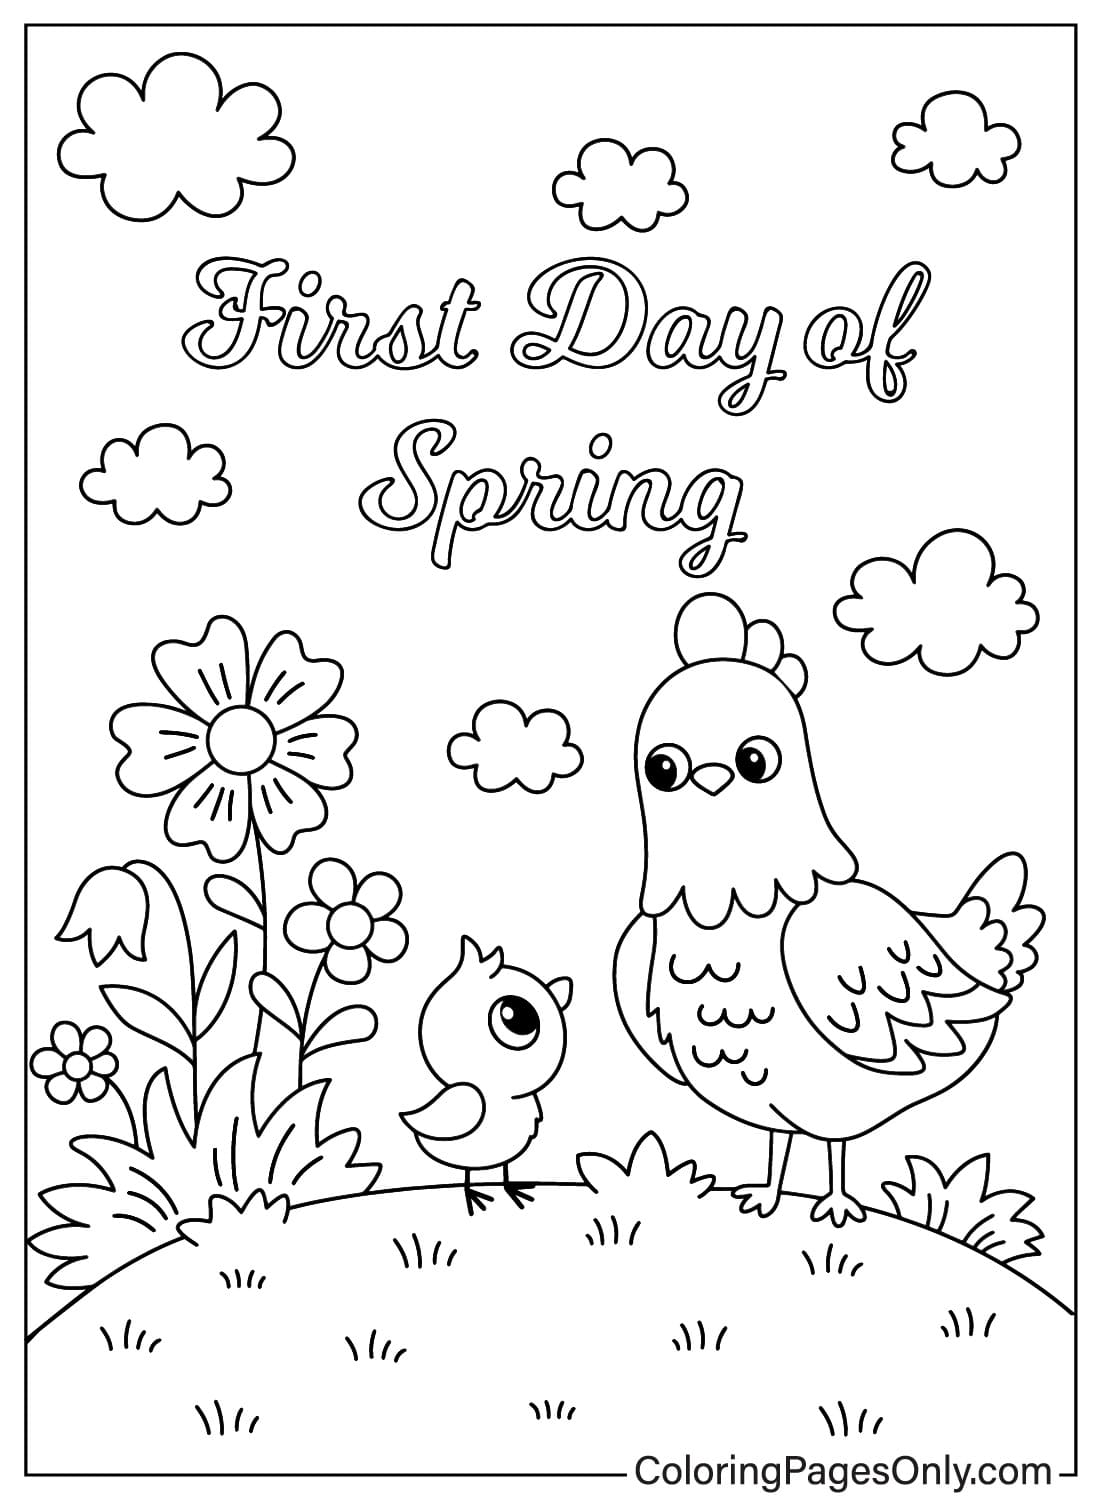 Chicken First Day of Spring Coloring Page from First Day of Spring